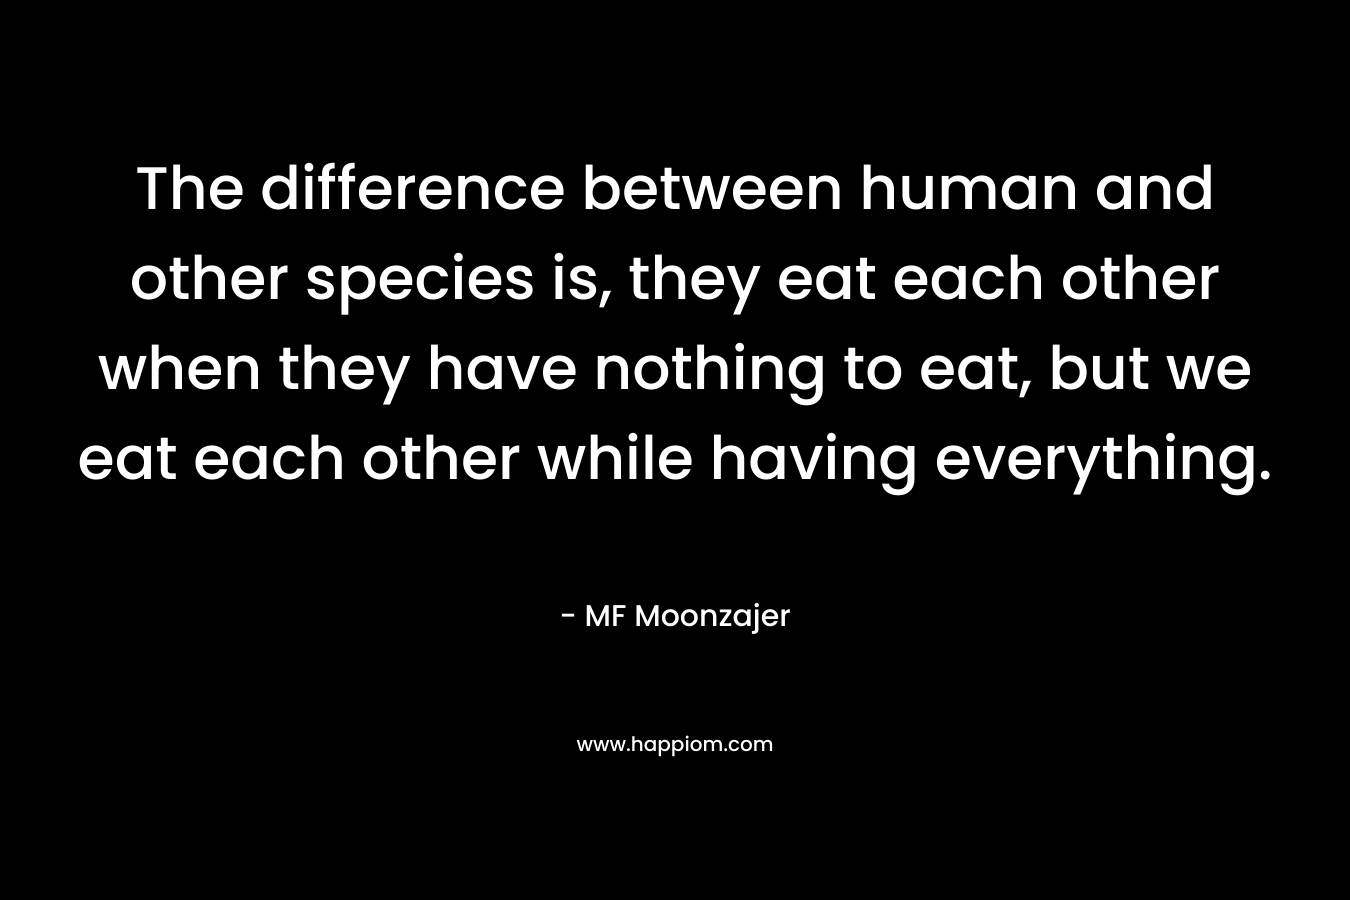 The difference between human and other species is, they eat each other when they have nothing to eat, but we eat each other while having everything.